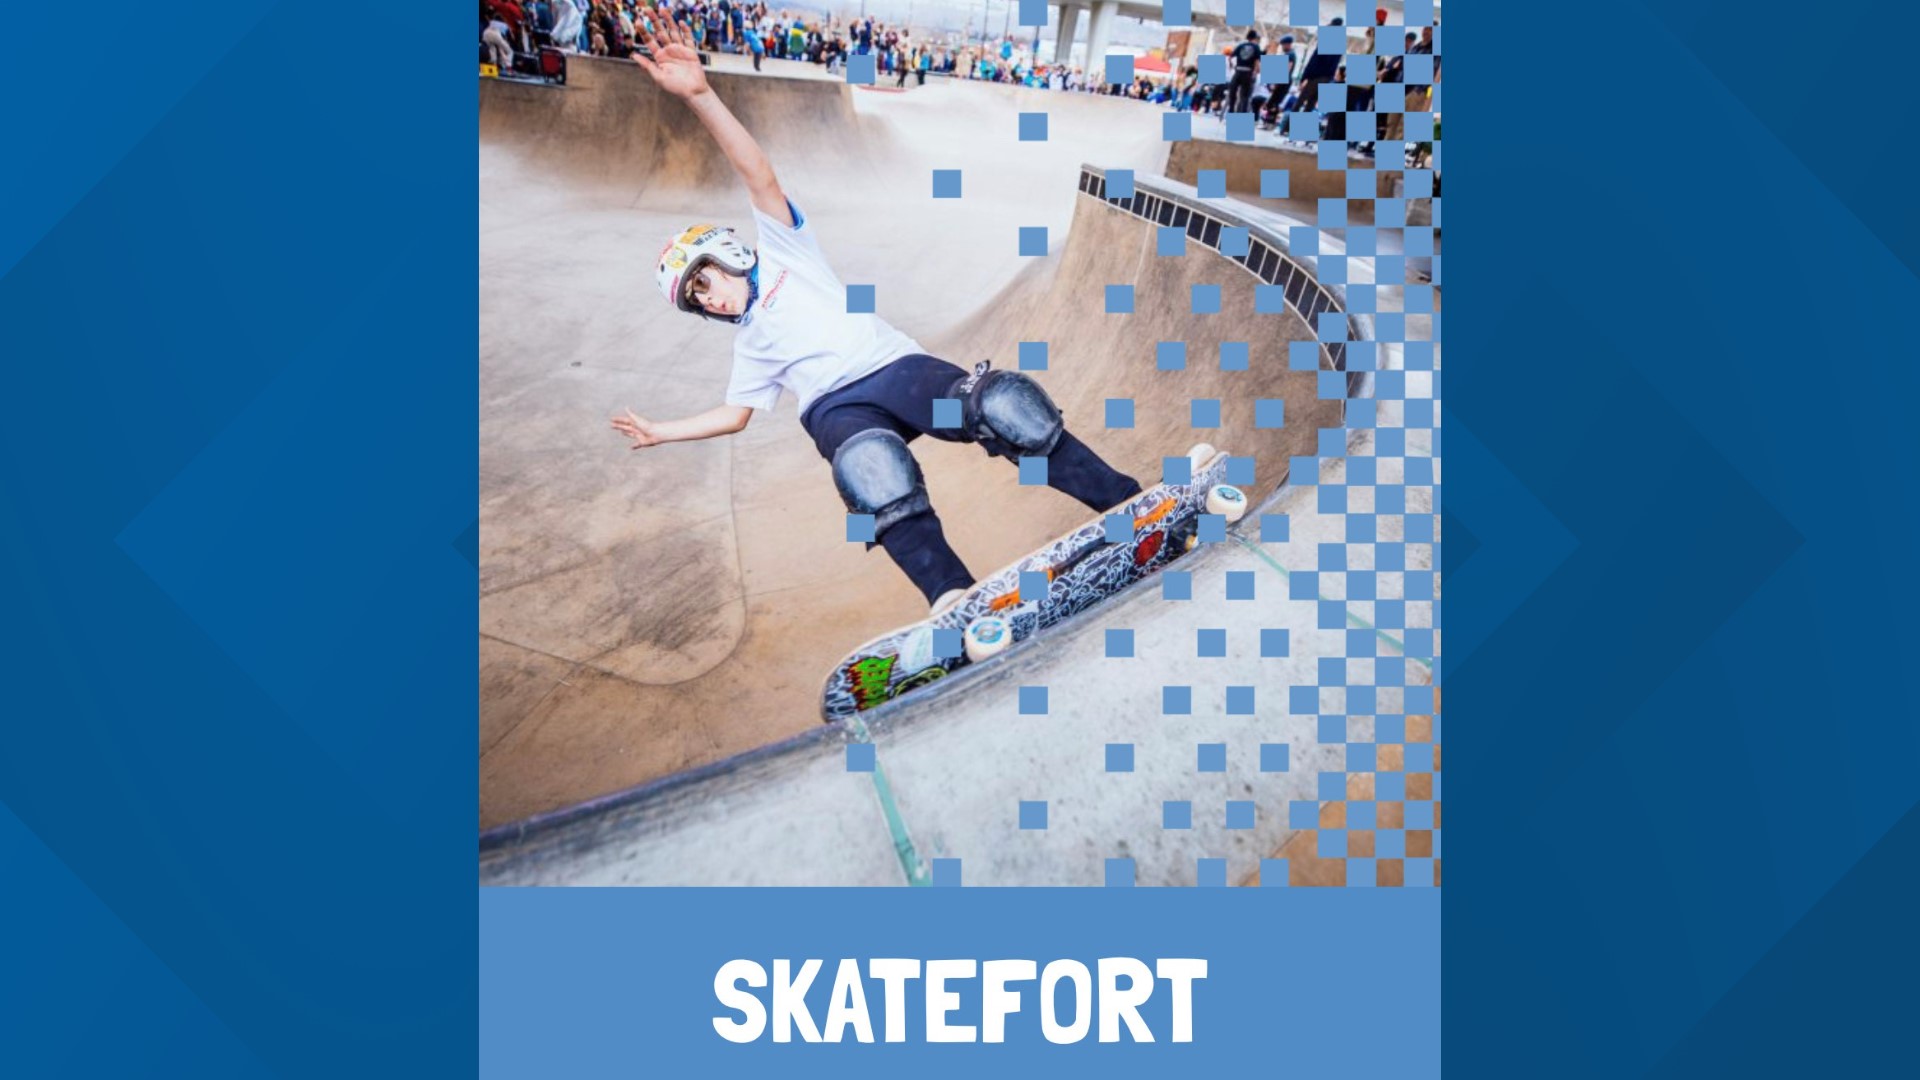 Treefort Music Fest 2024 will feature 'Skatefort' at Rhodes Skate Park on March 23. There will be giveaways, free skating and live musical performances all day.